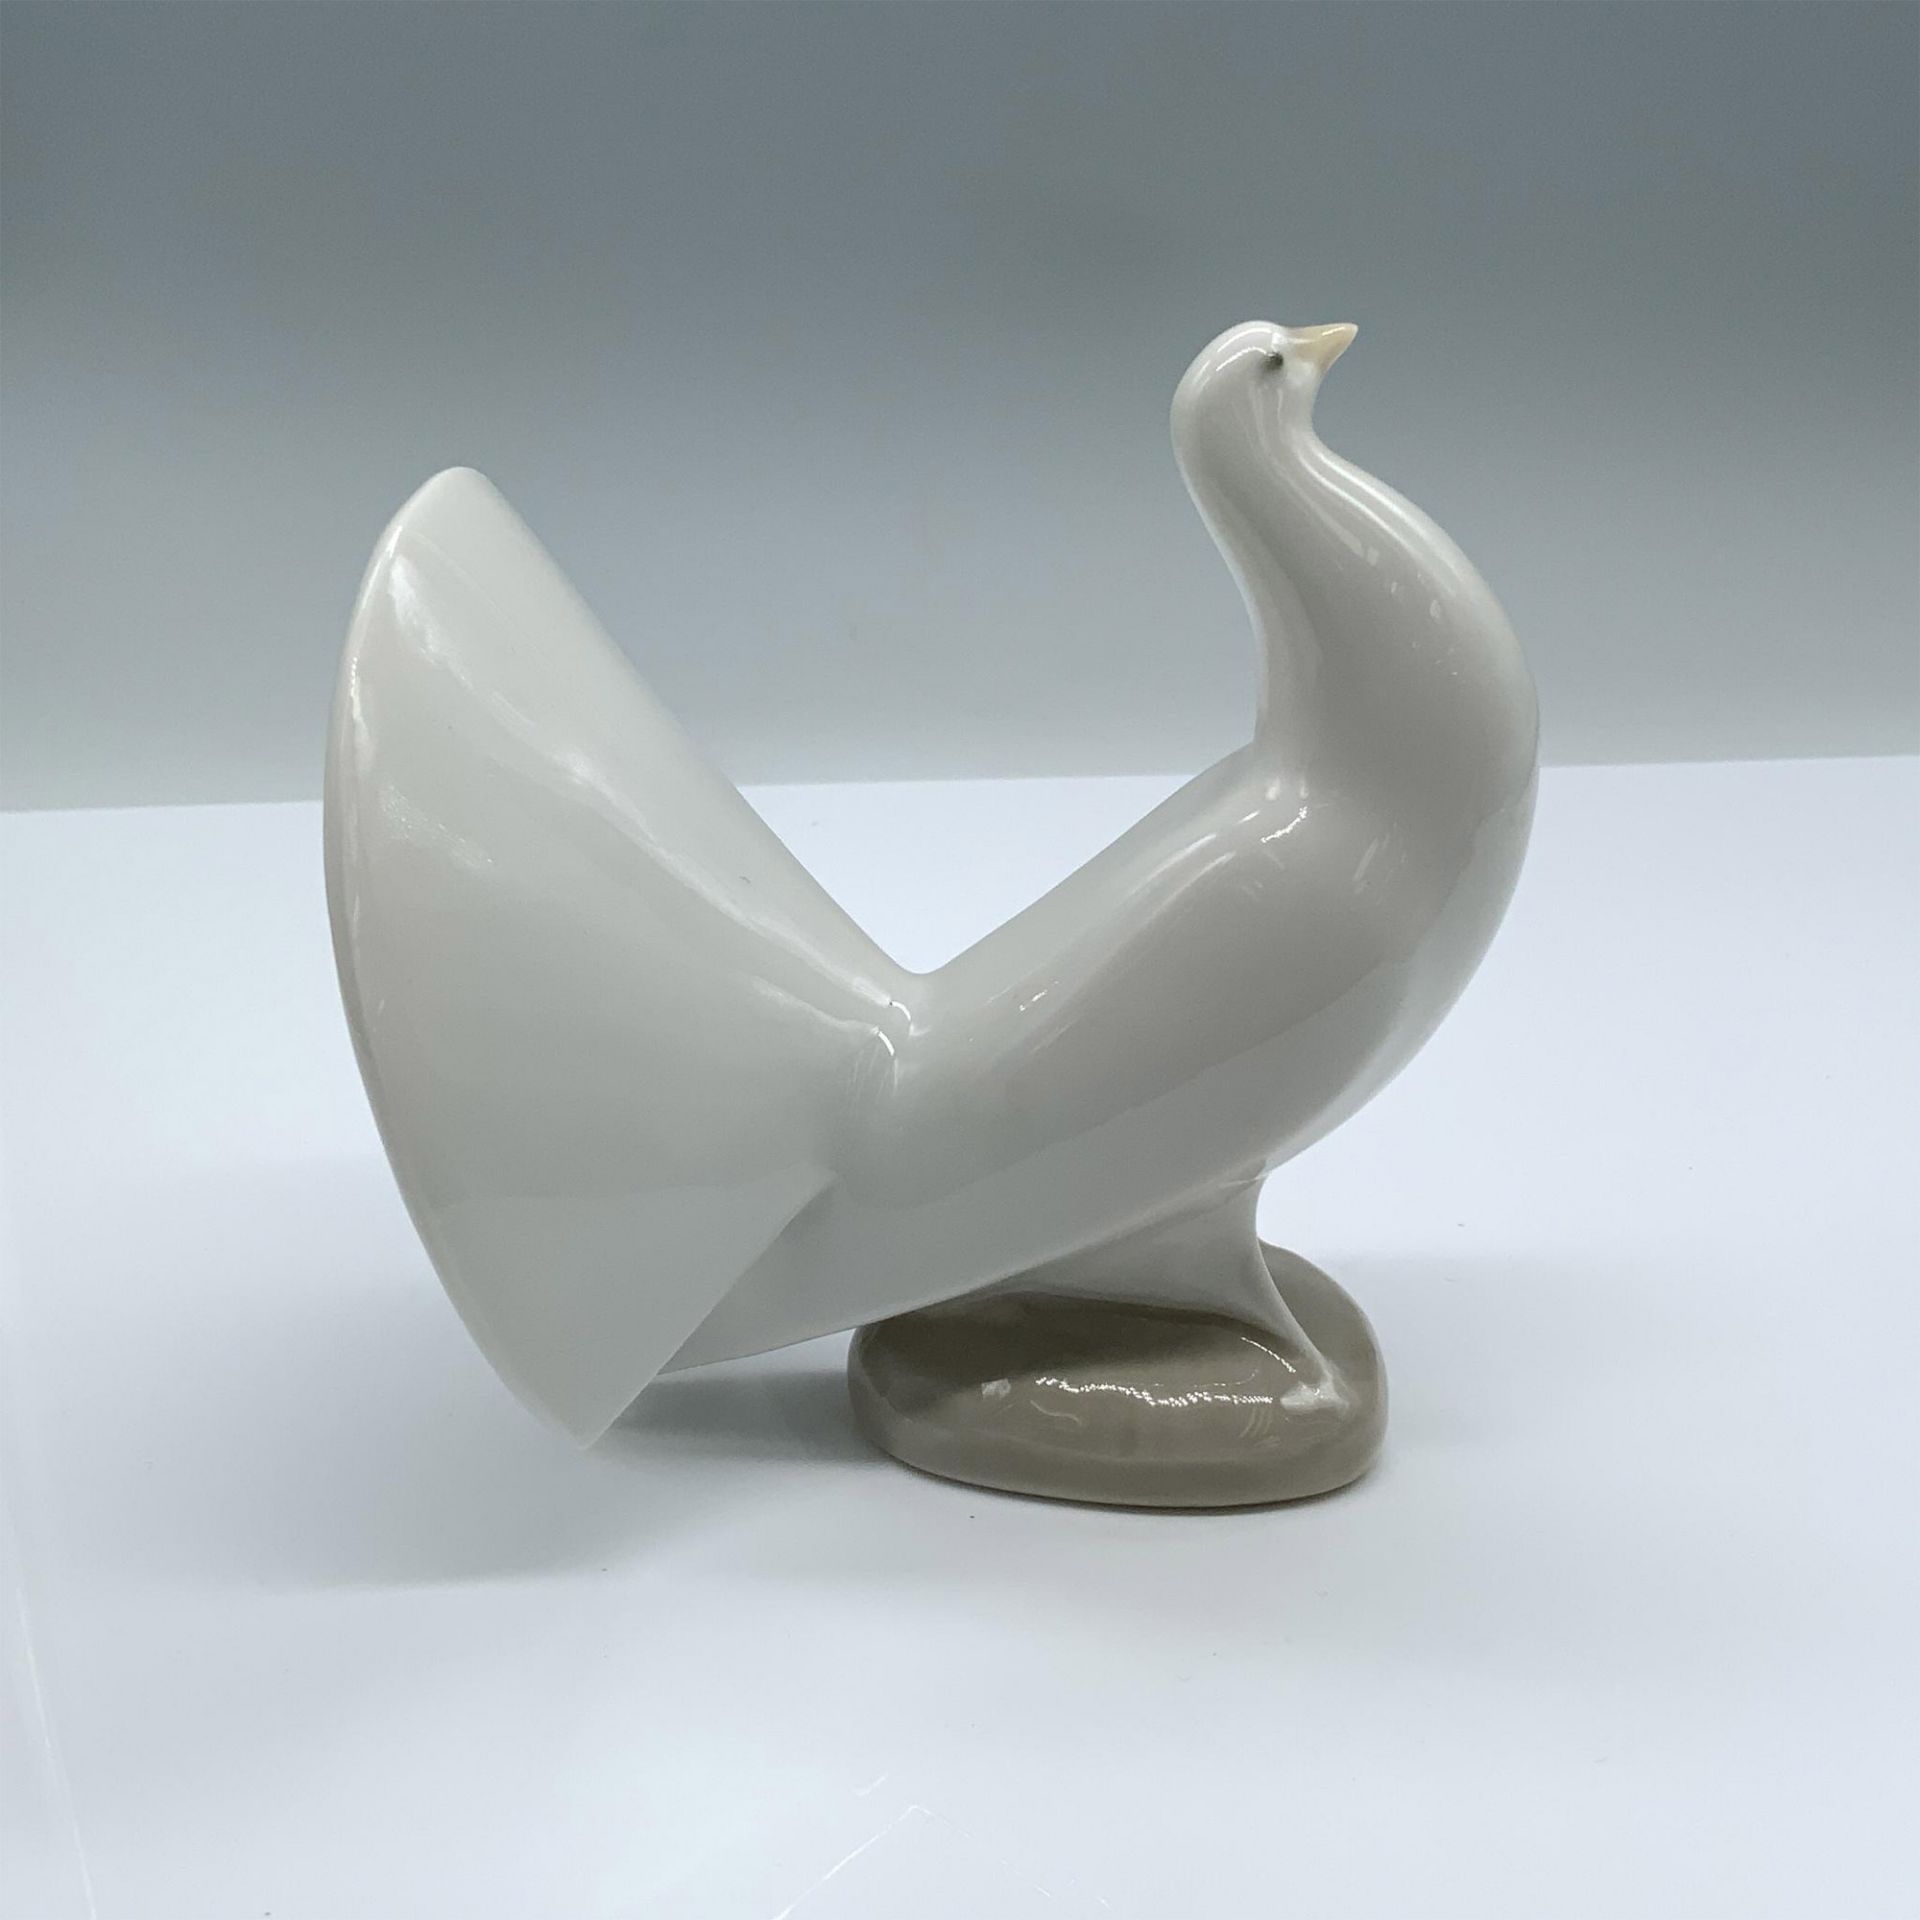 Nao by Lladro Porcelain Figurine, Dove Bird - Image 3 of 6